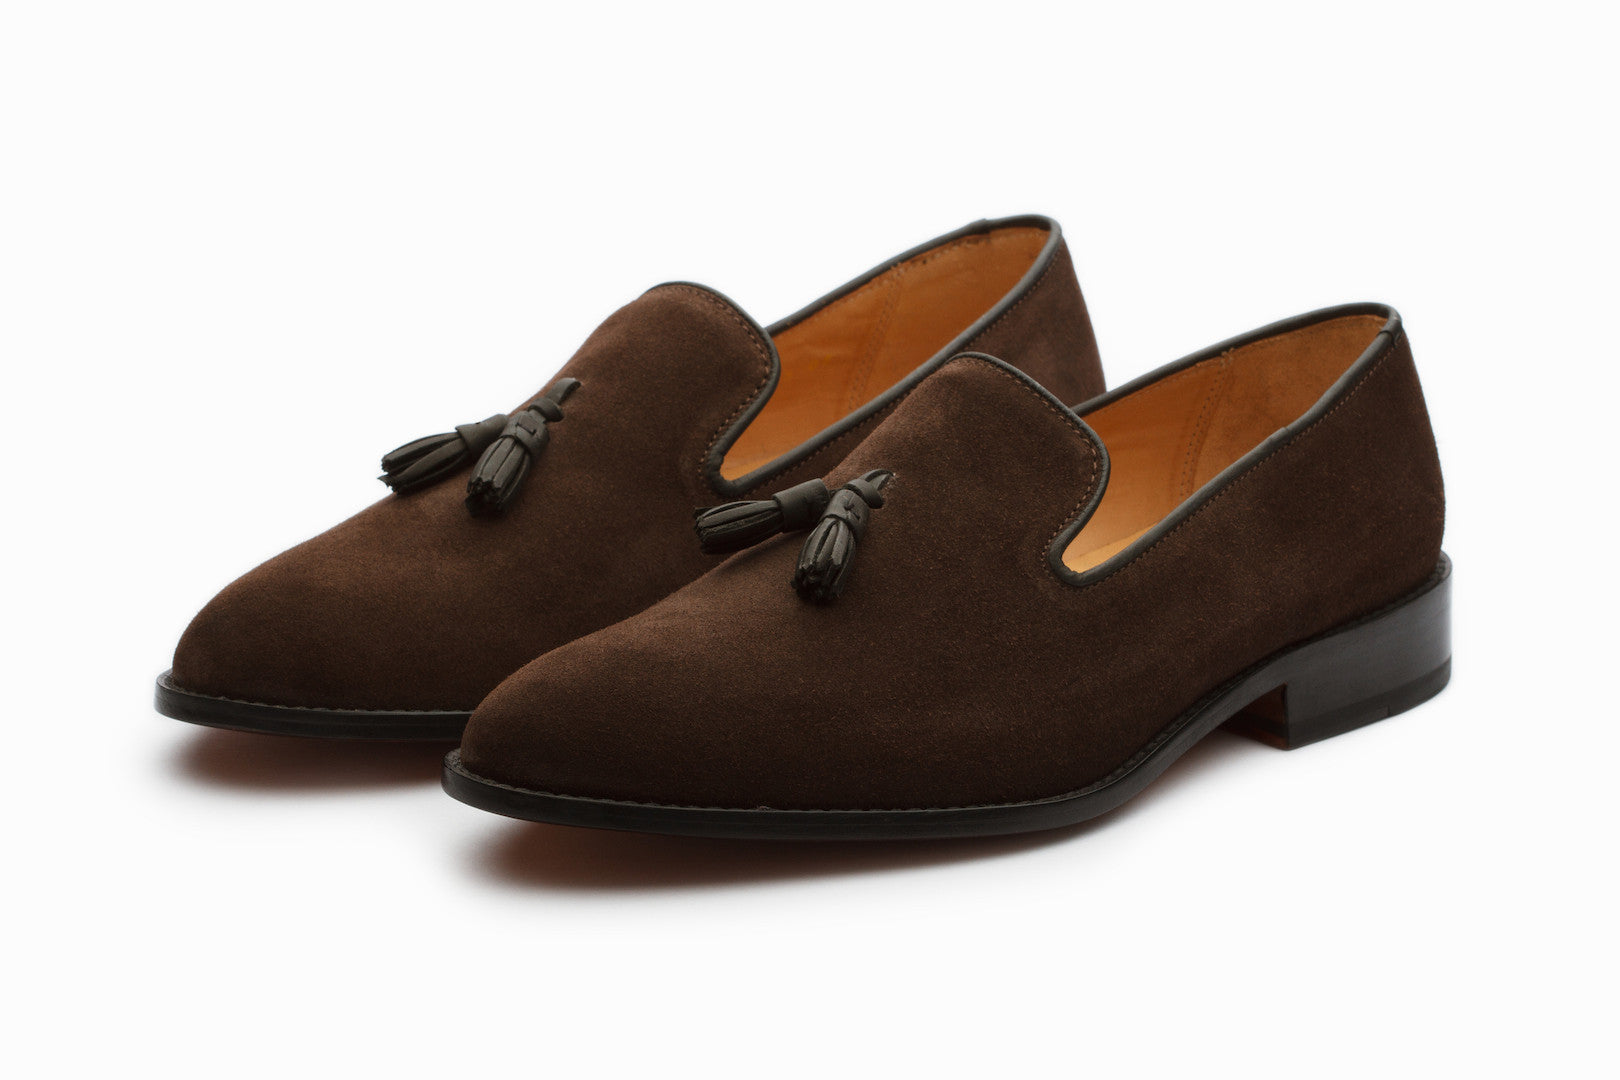 nema mustard suede leather striped loafers